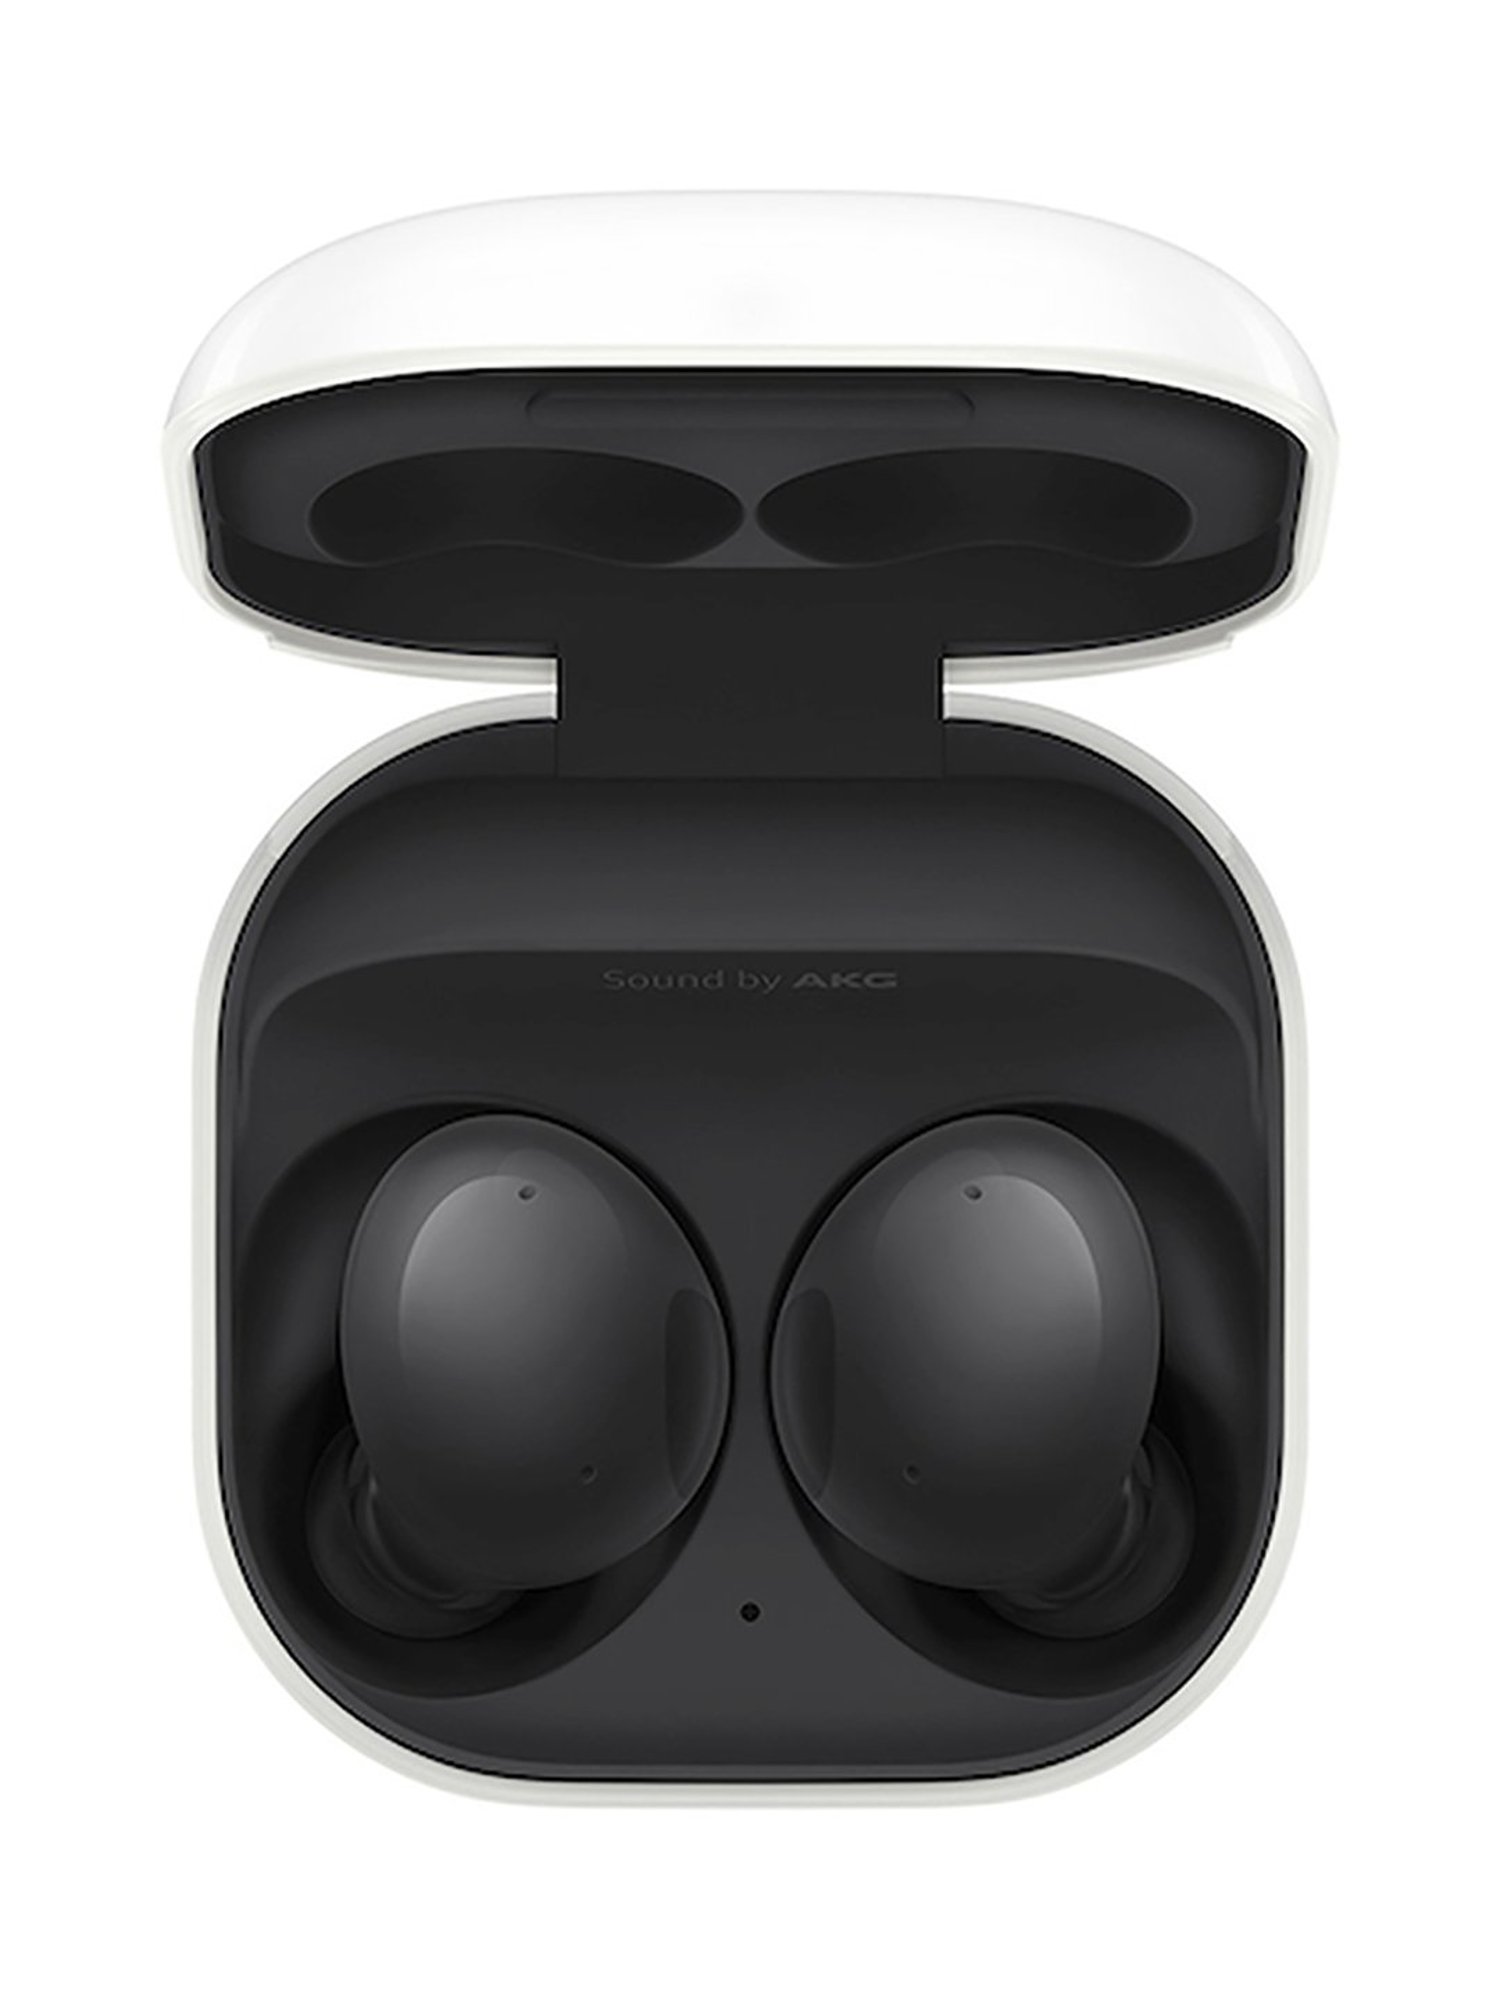 SAMSUNG Galaxy Buds 2 True Wireless Bluetooth Earbuds, Noise Cancelling,  Ambient Sound, Lightweight Comfort Fit In Ear, Auto Switch Audio, Long